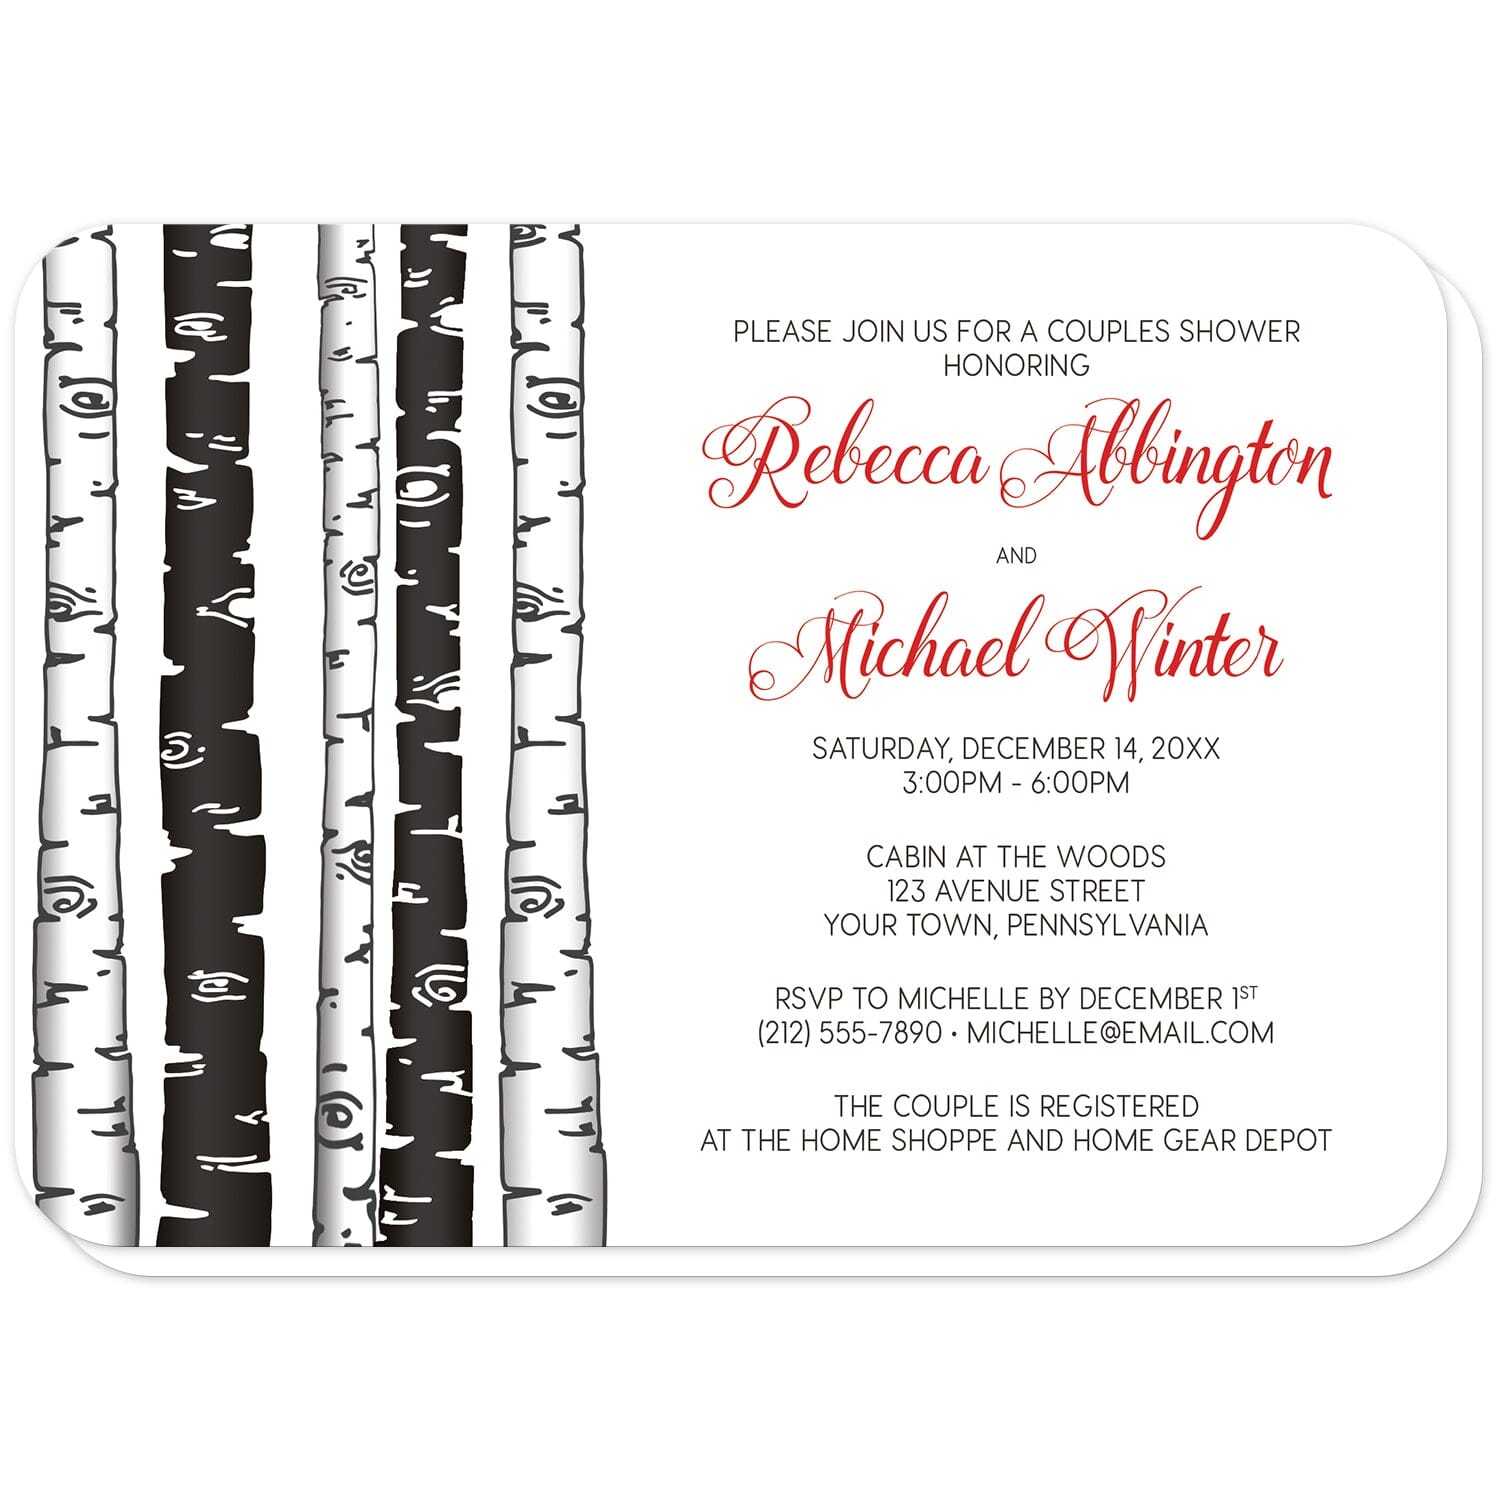 Monochrome Birch Tree with Red Couples Shower Invitations (with rounded corners) at Artistically Invited. Monochrome birch tree with red couples shower invitations with an alternating monochrome black and white birch trees illustration along the left side. Your personalized couples shower celebration details are custom printed beside the trees in black with the couple's names printed in a red script font for a splash of color.